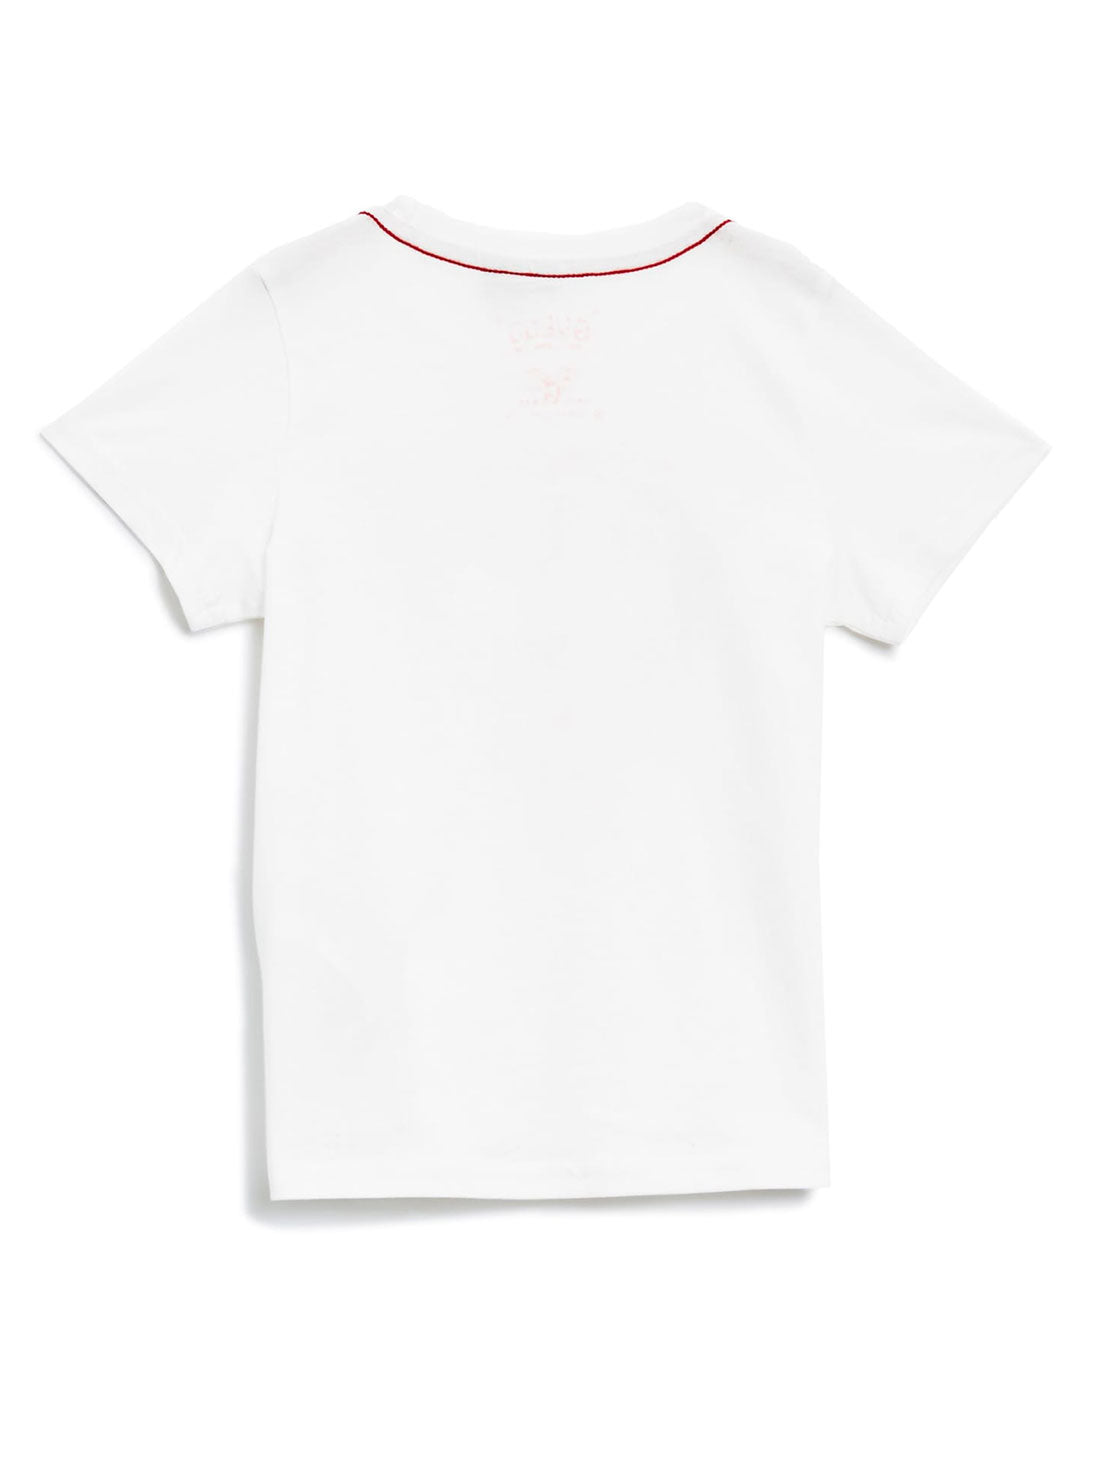 GUESS Little Boys White Short Sleeve Triangle Logo Tee (2-7)  N73I55K5M20 Back View